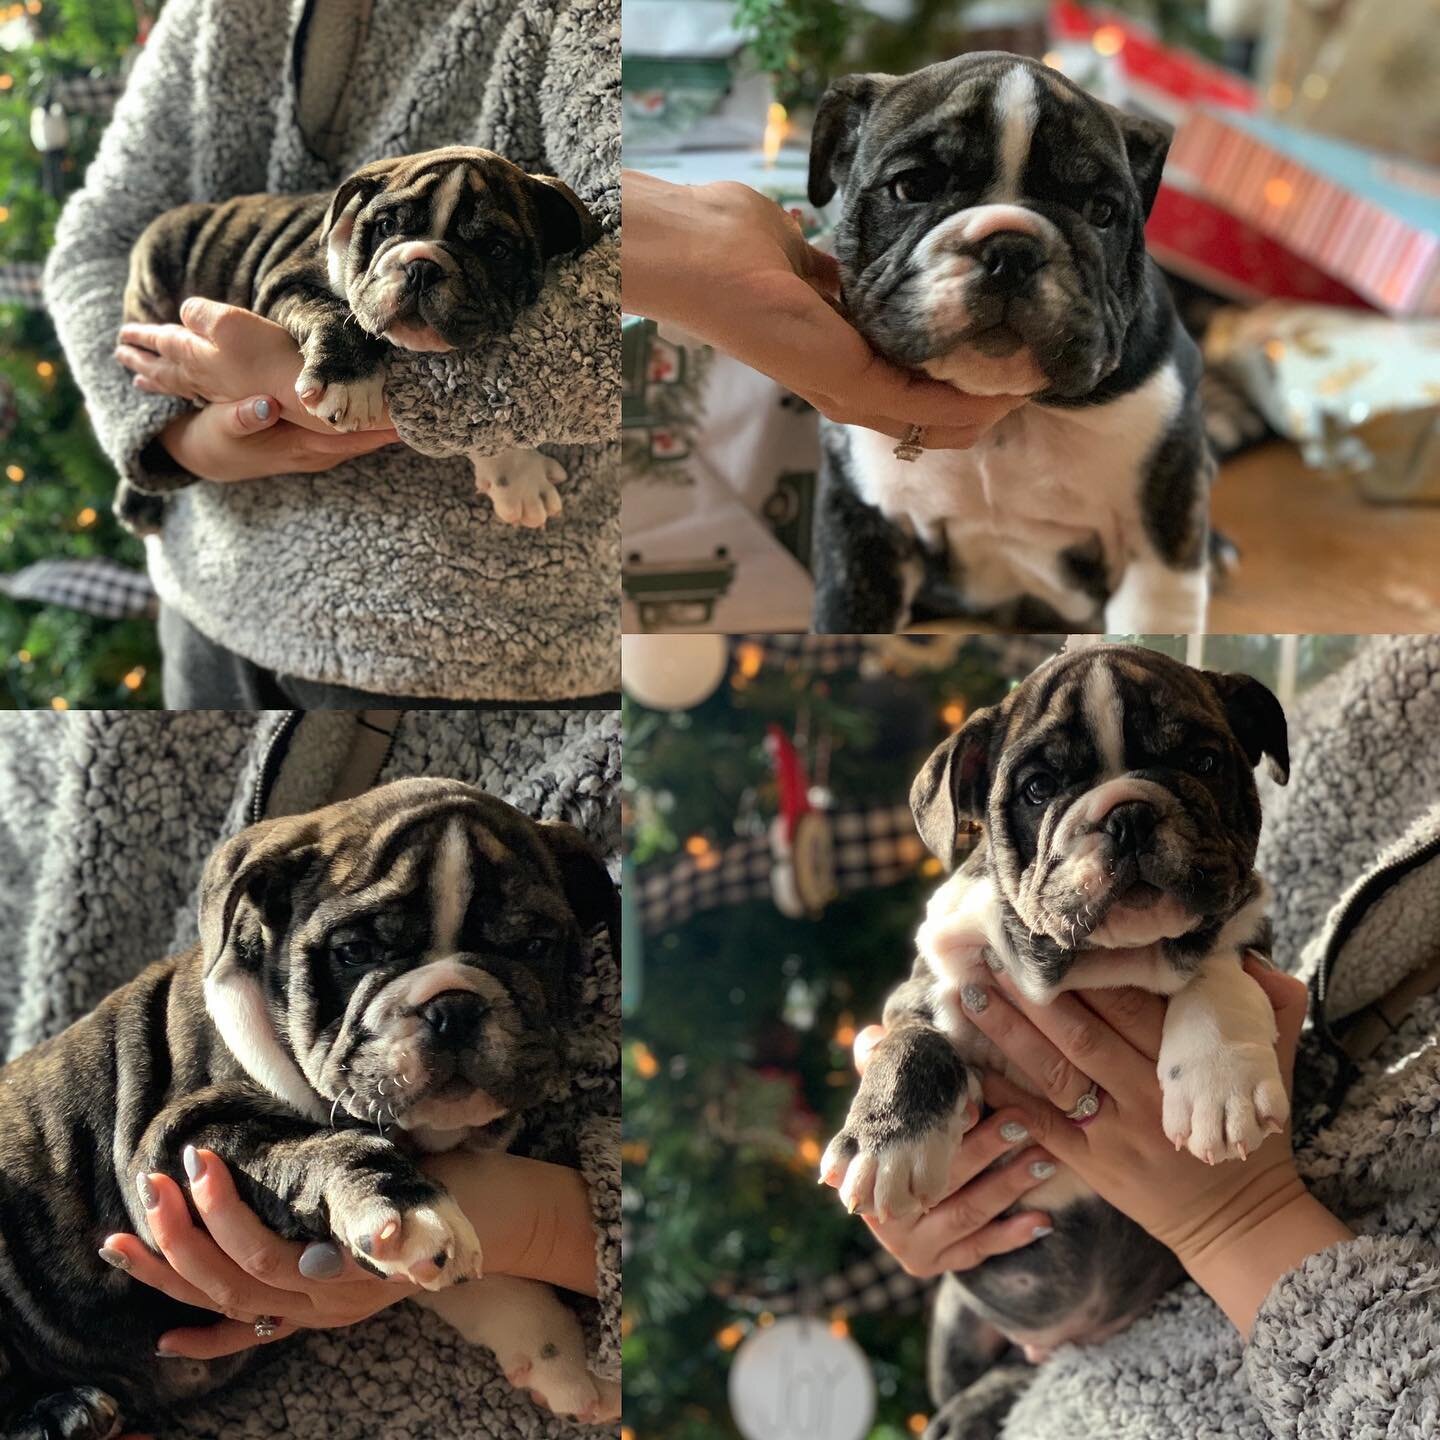 Jackson baby is a gentle giant. He&rsquo;s easy going, chill and loves playing with the kids

Jackson comes with 2 vaccines, he&rsquo;s microchipped and AKC registered. 

#bulldogpuppies #englishbulldogs #christmaspuppy #washington #washingtonbulldog